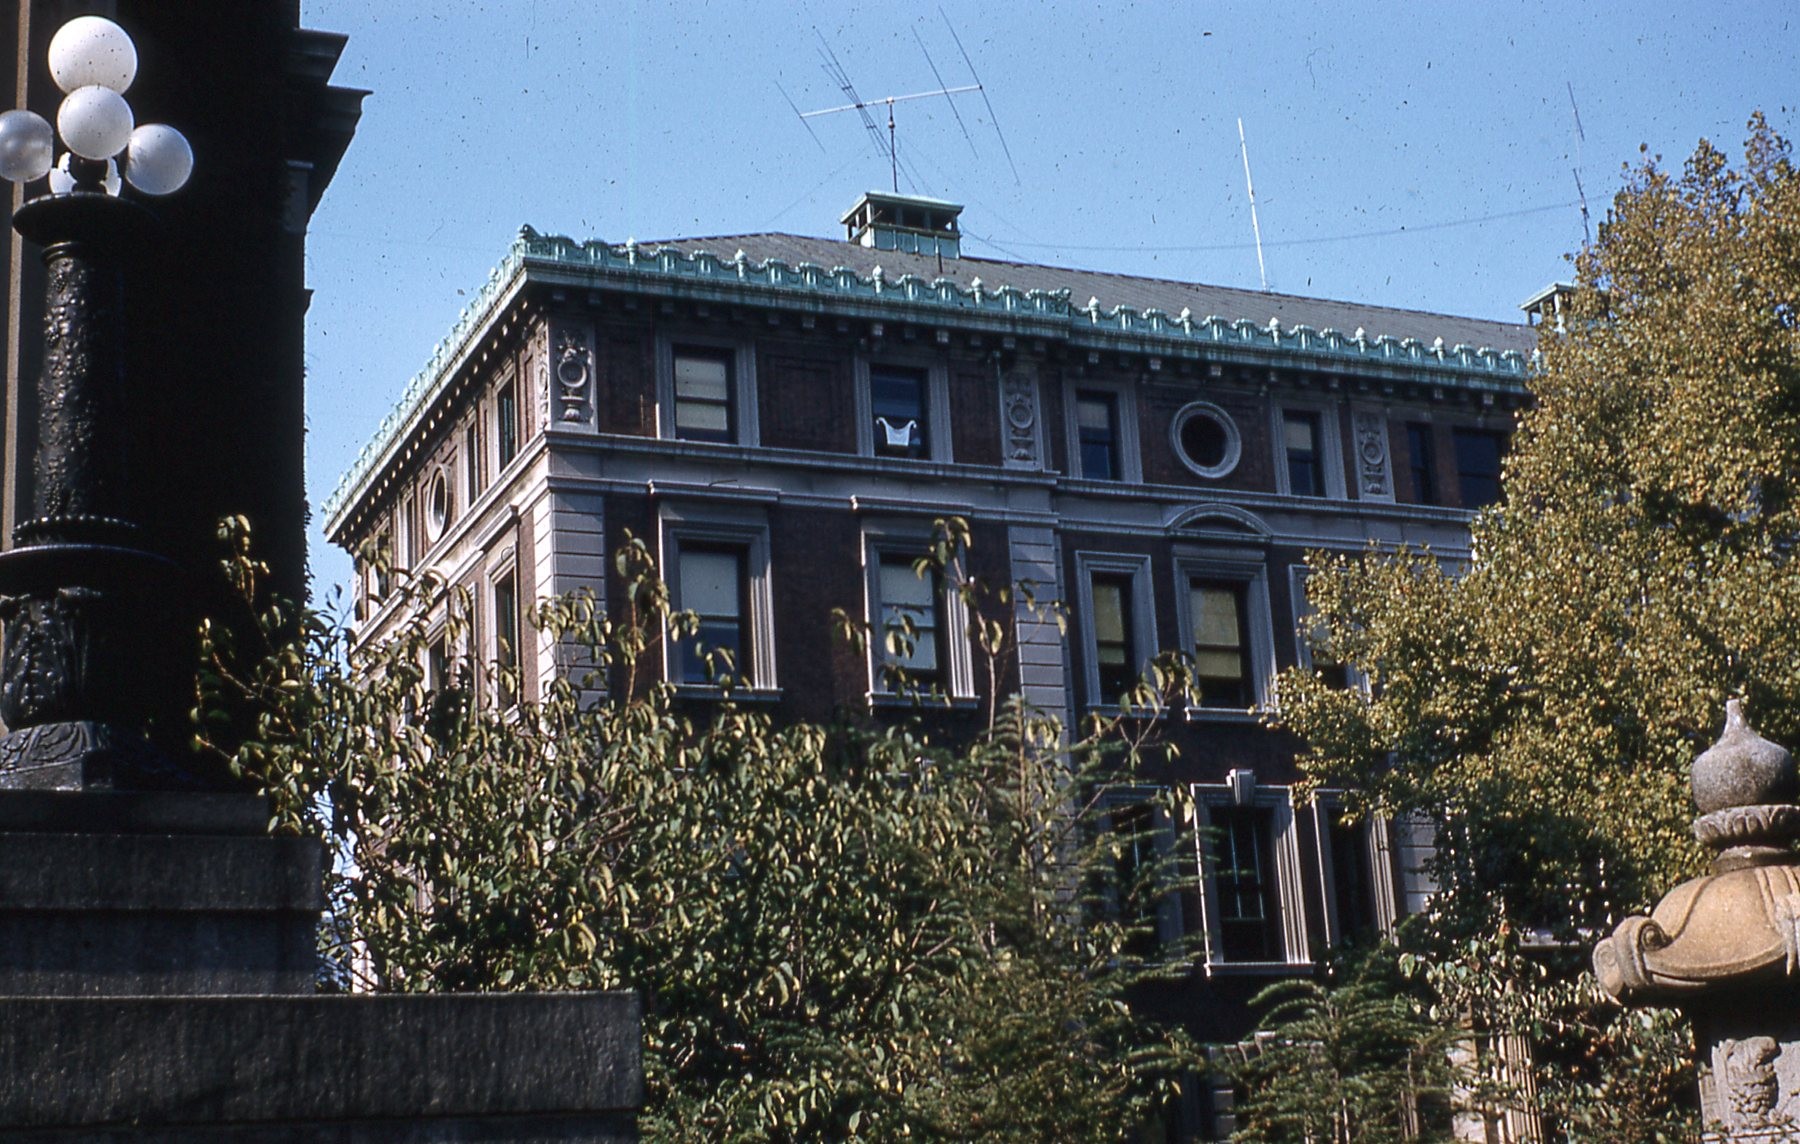 Photo of exterior of old Engineering Building showing rooftop antennas